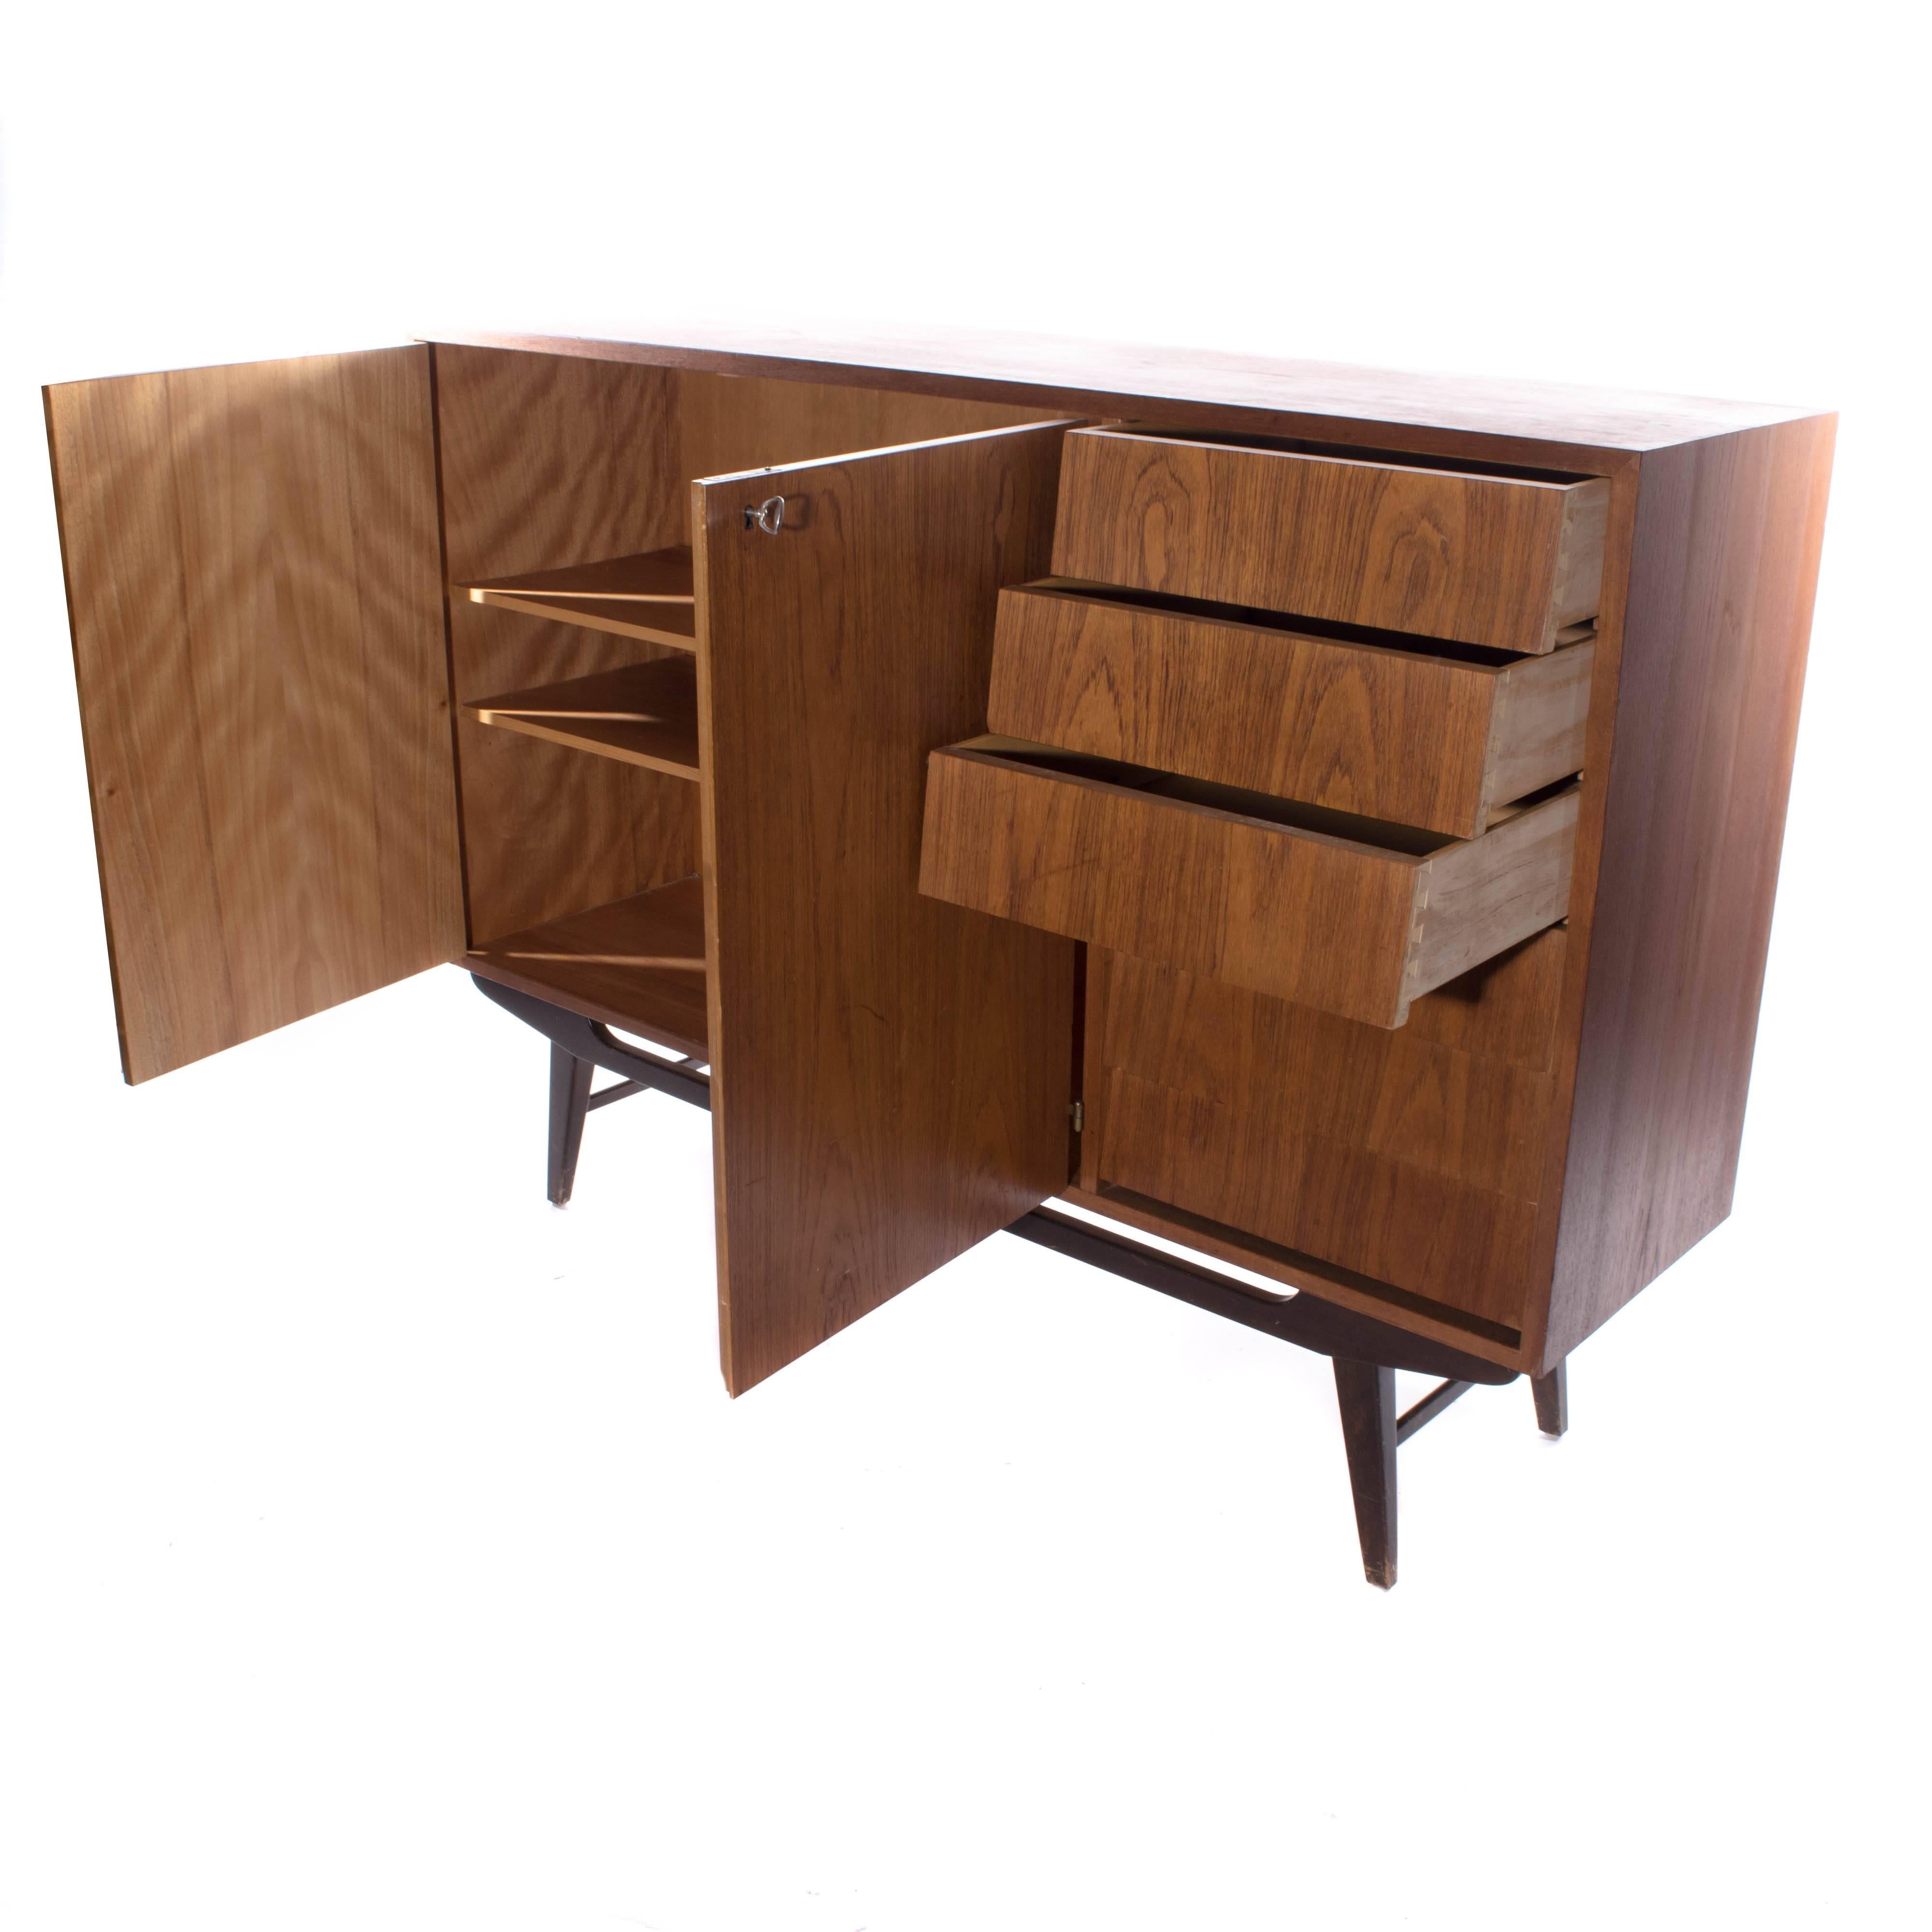 Stunning sideboard that will add character to any interior space.